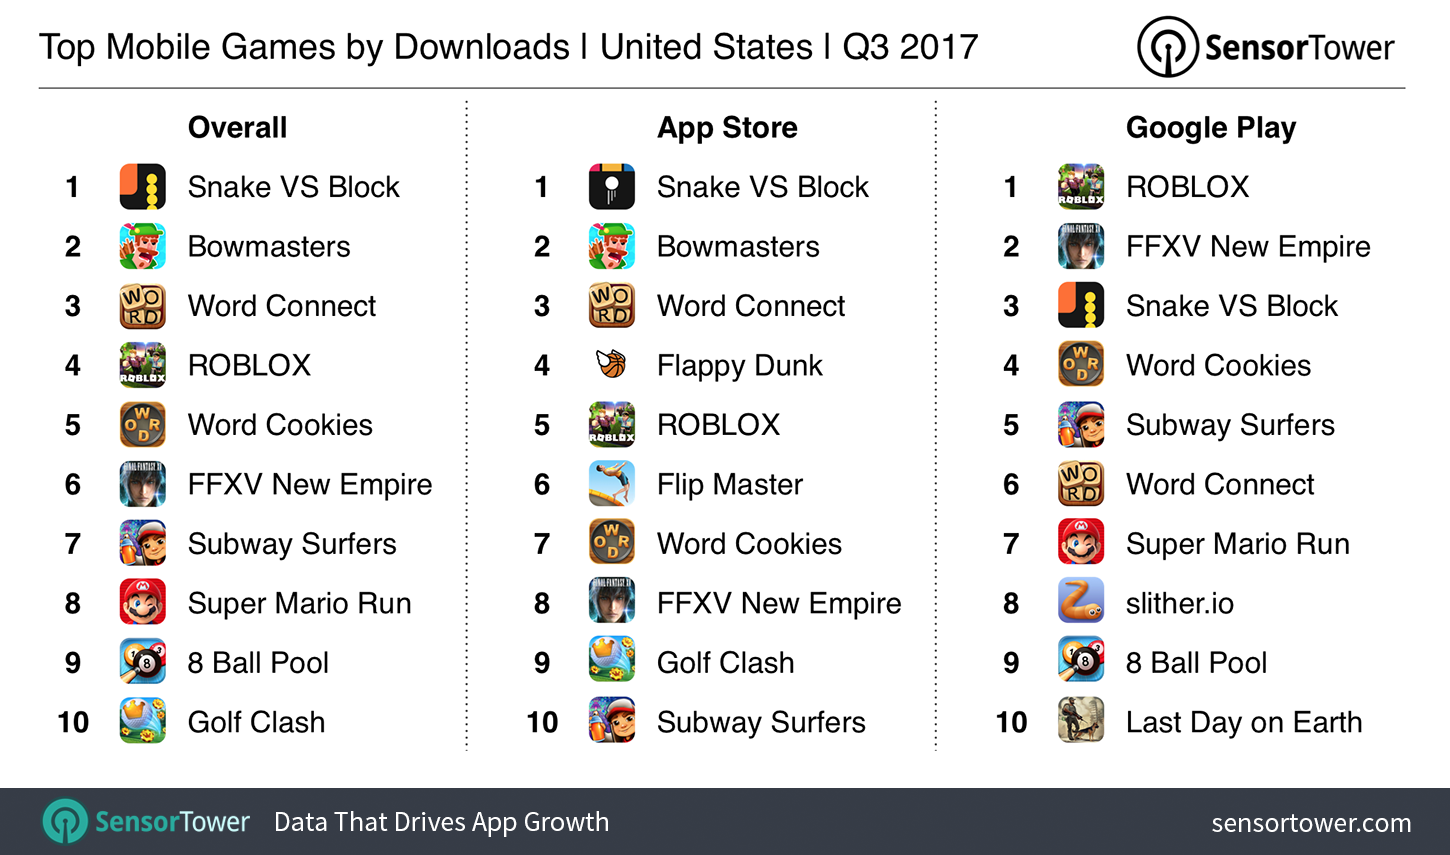 Q3 2017's Top U.S. Mobile Games by Downloads